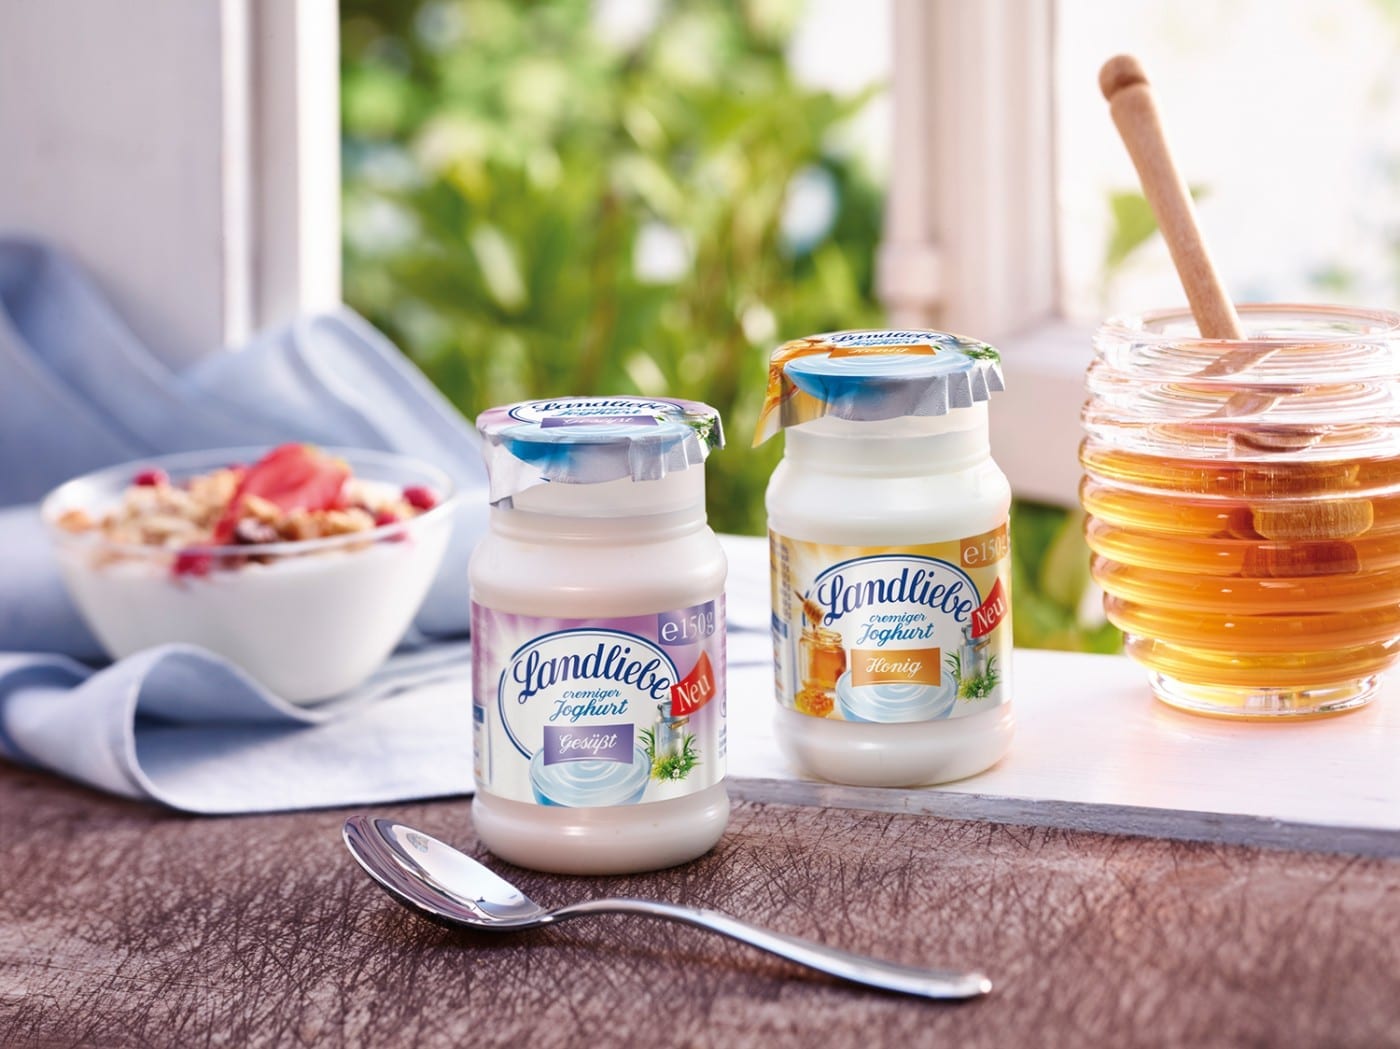 its milk finest yogurt Landliebe for pudding, rice advertising and